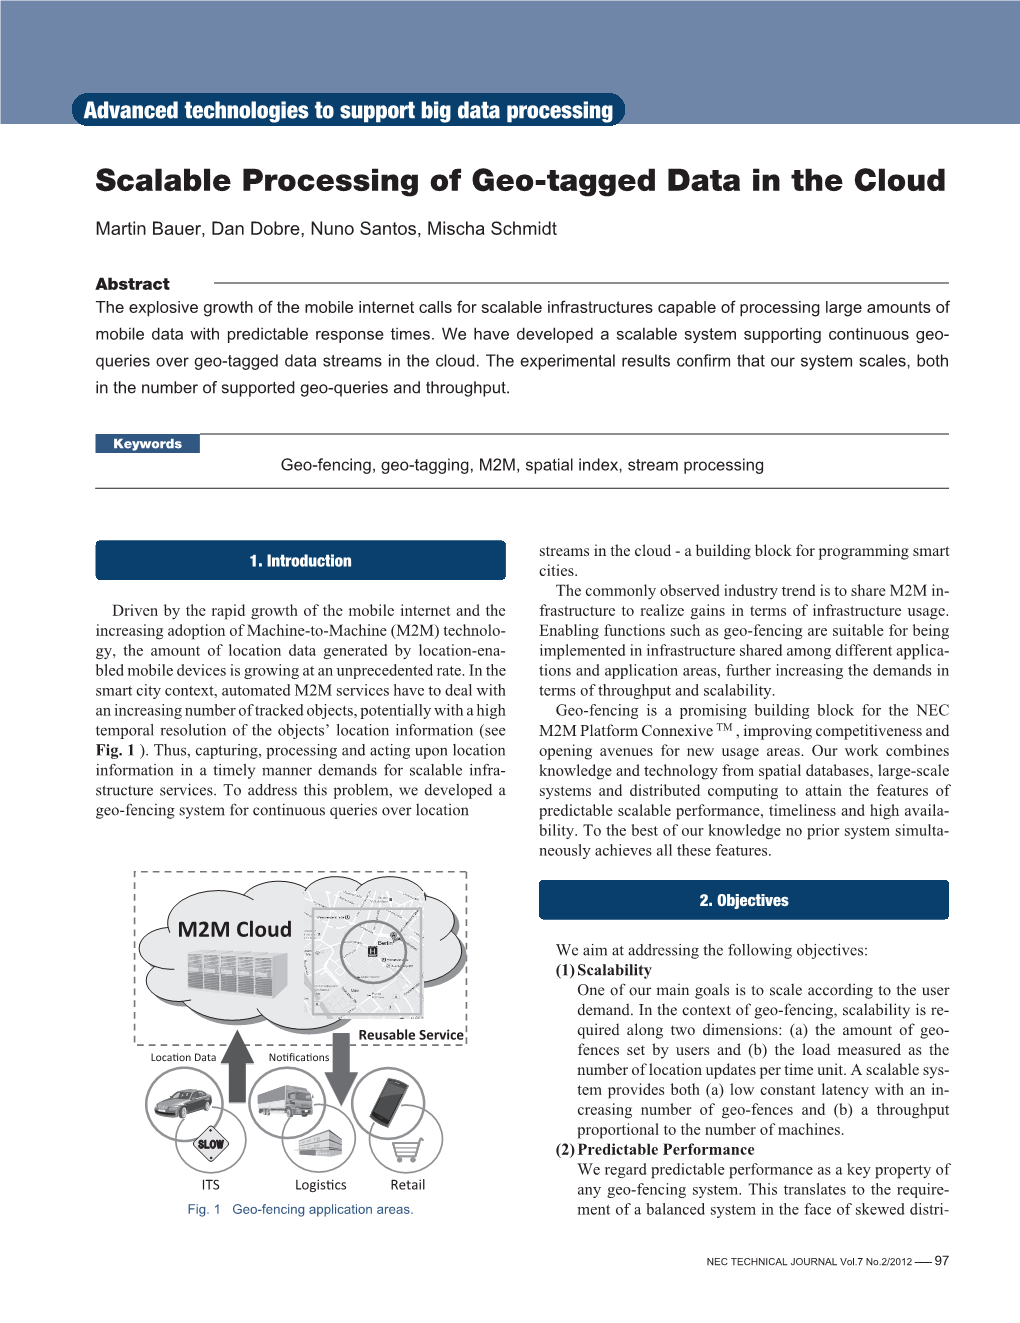 Scalable Processing of Geo-Tagged Data in the Cloud